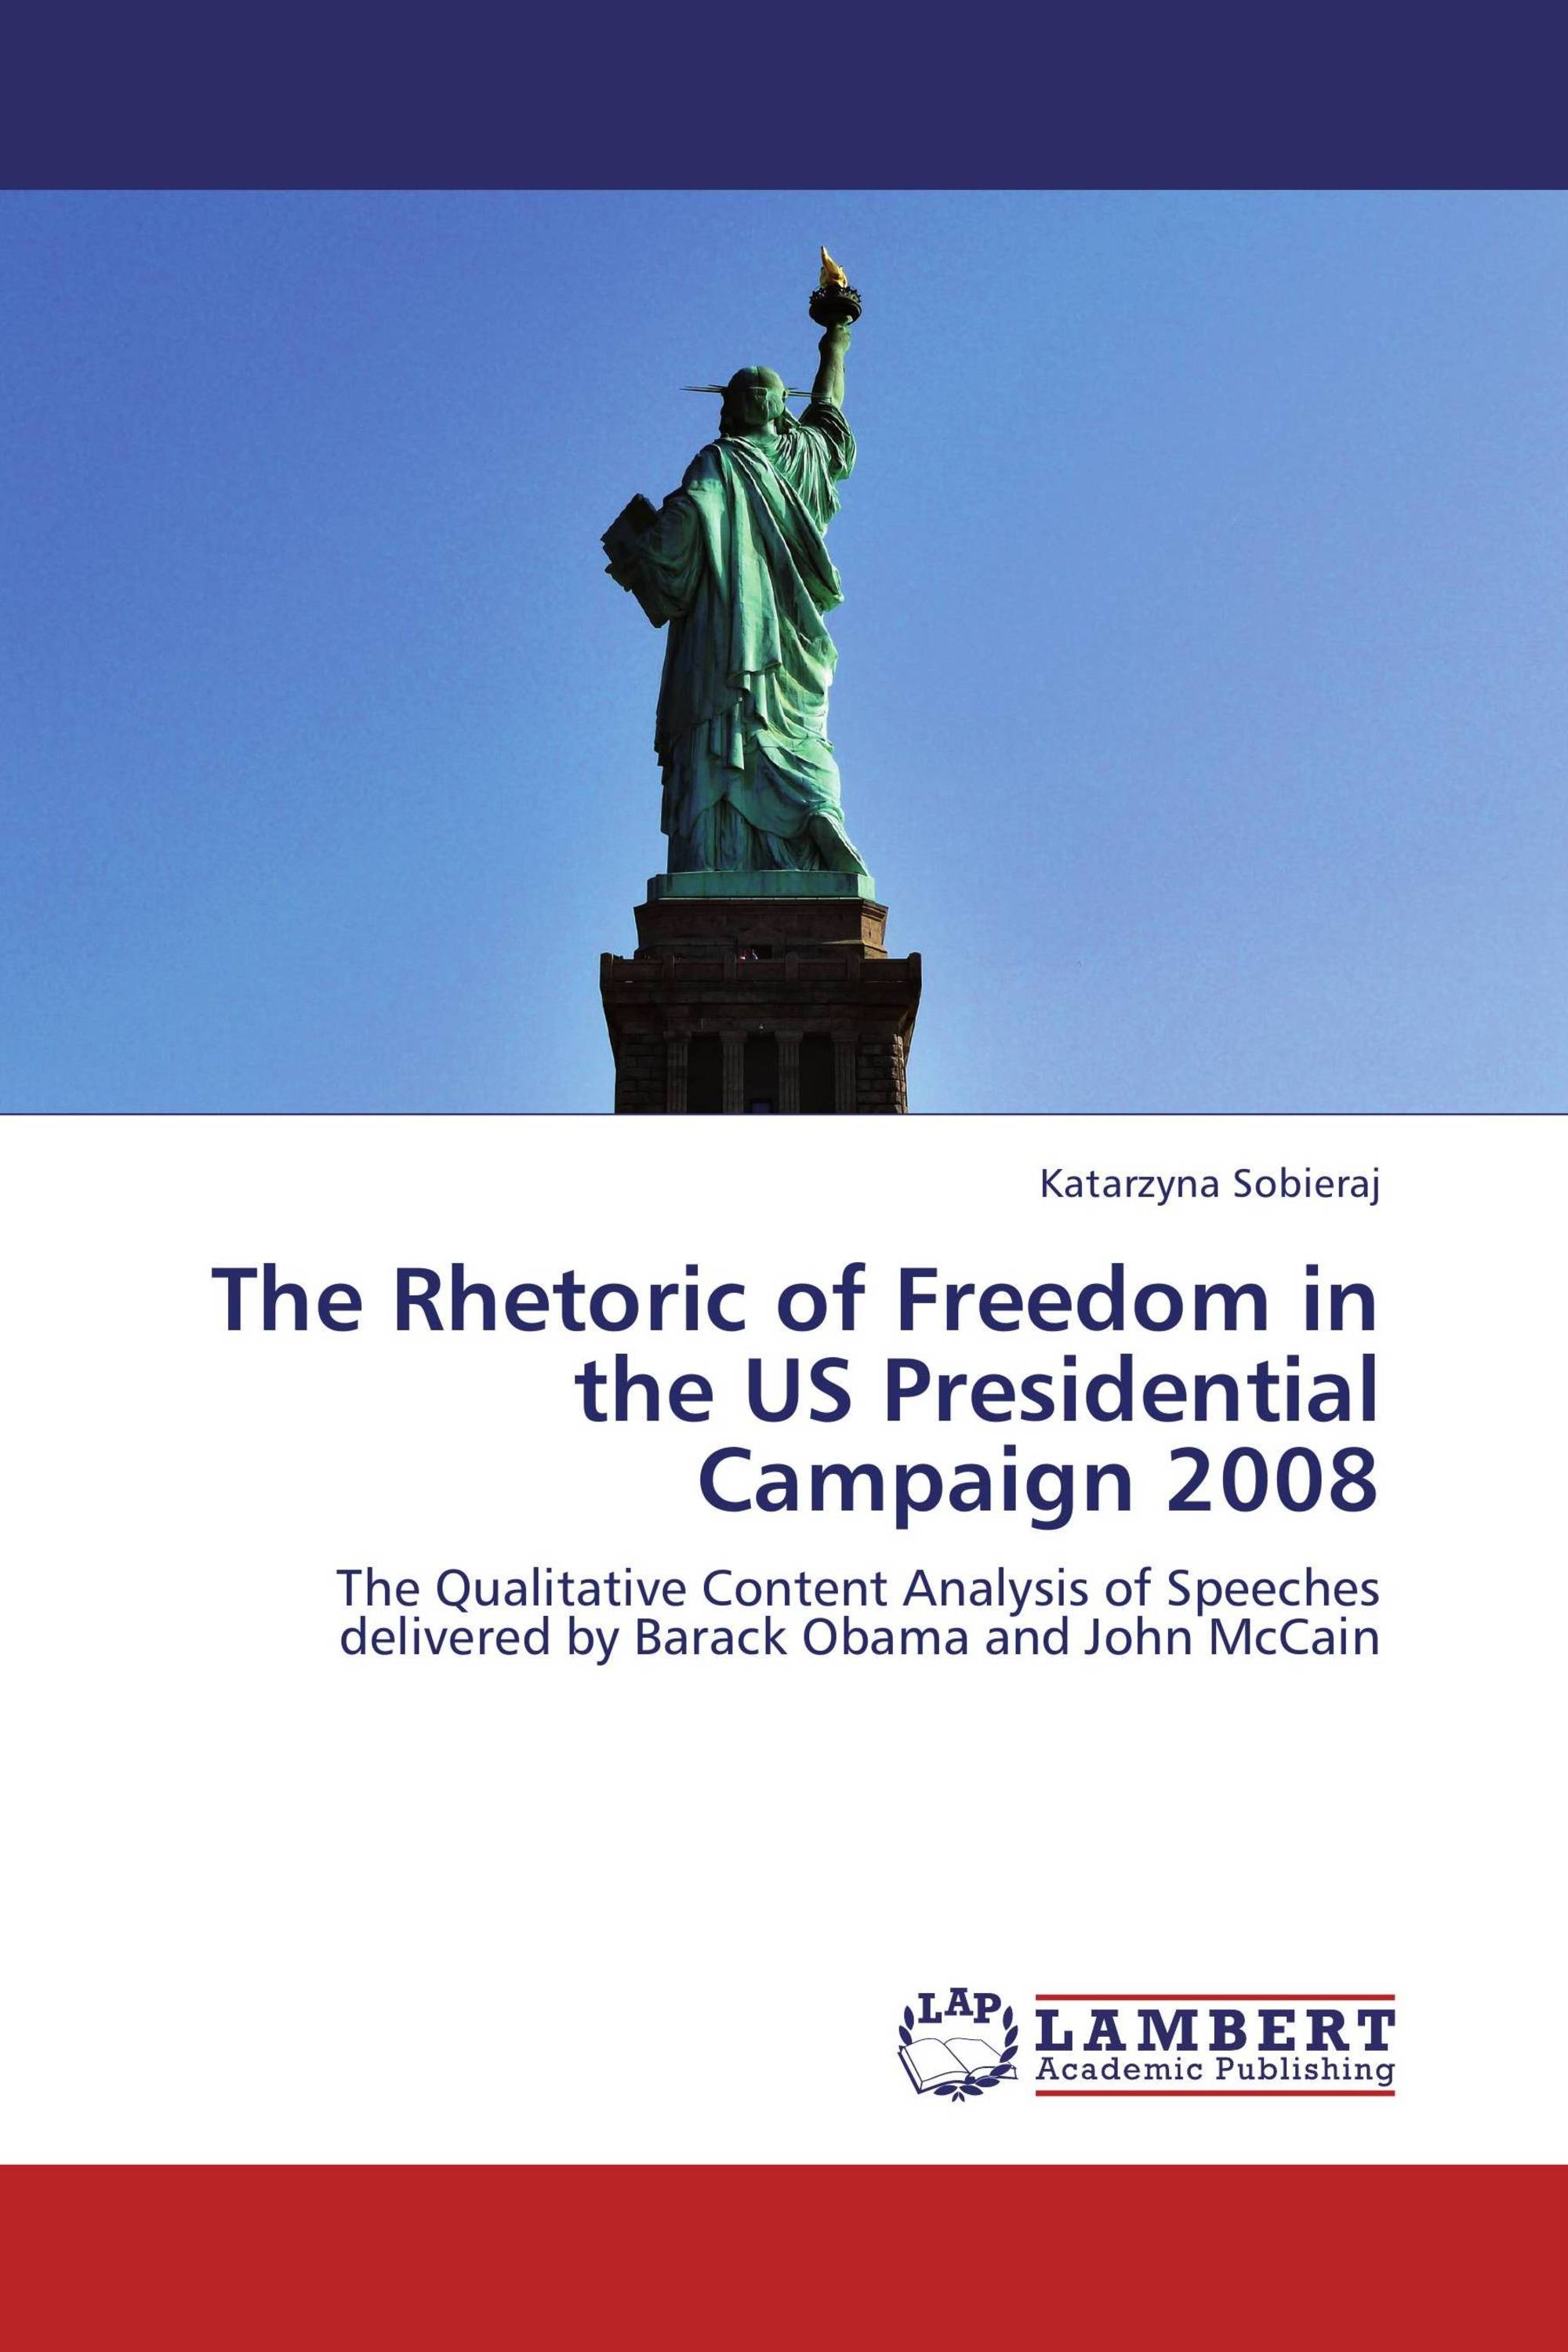 The Rhetoric of Freedom in the US Presidential Campaign 2008